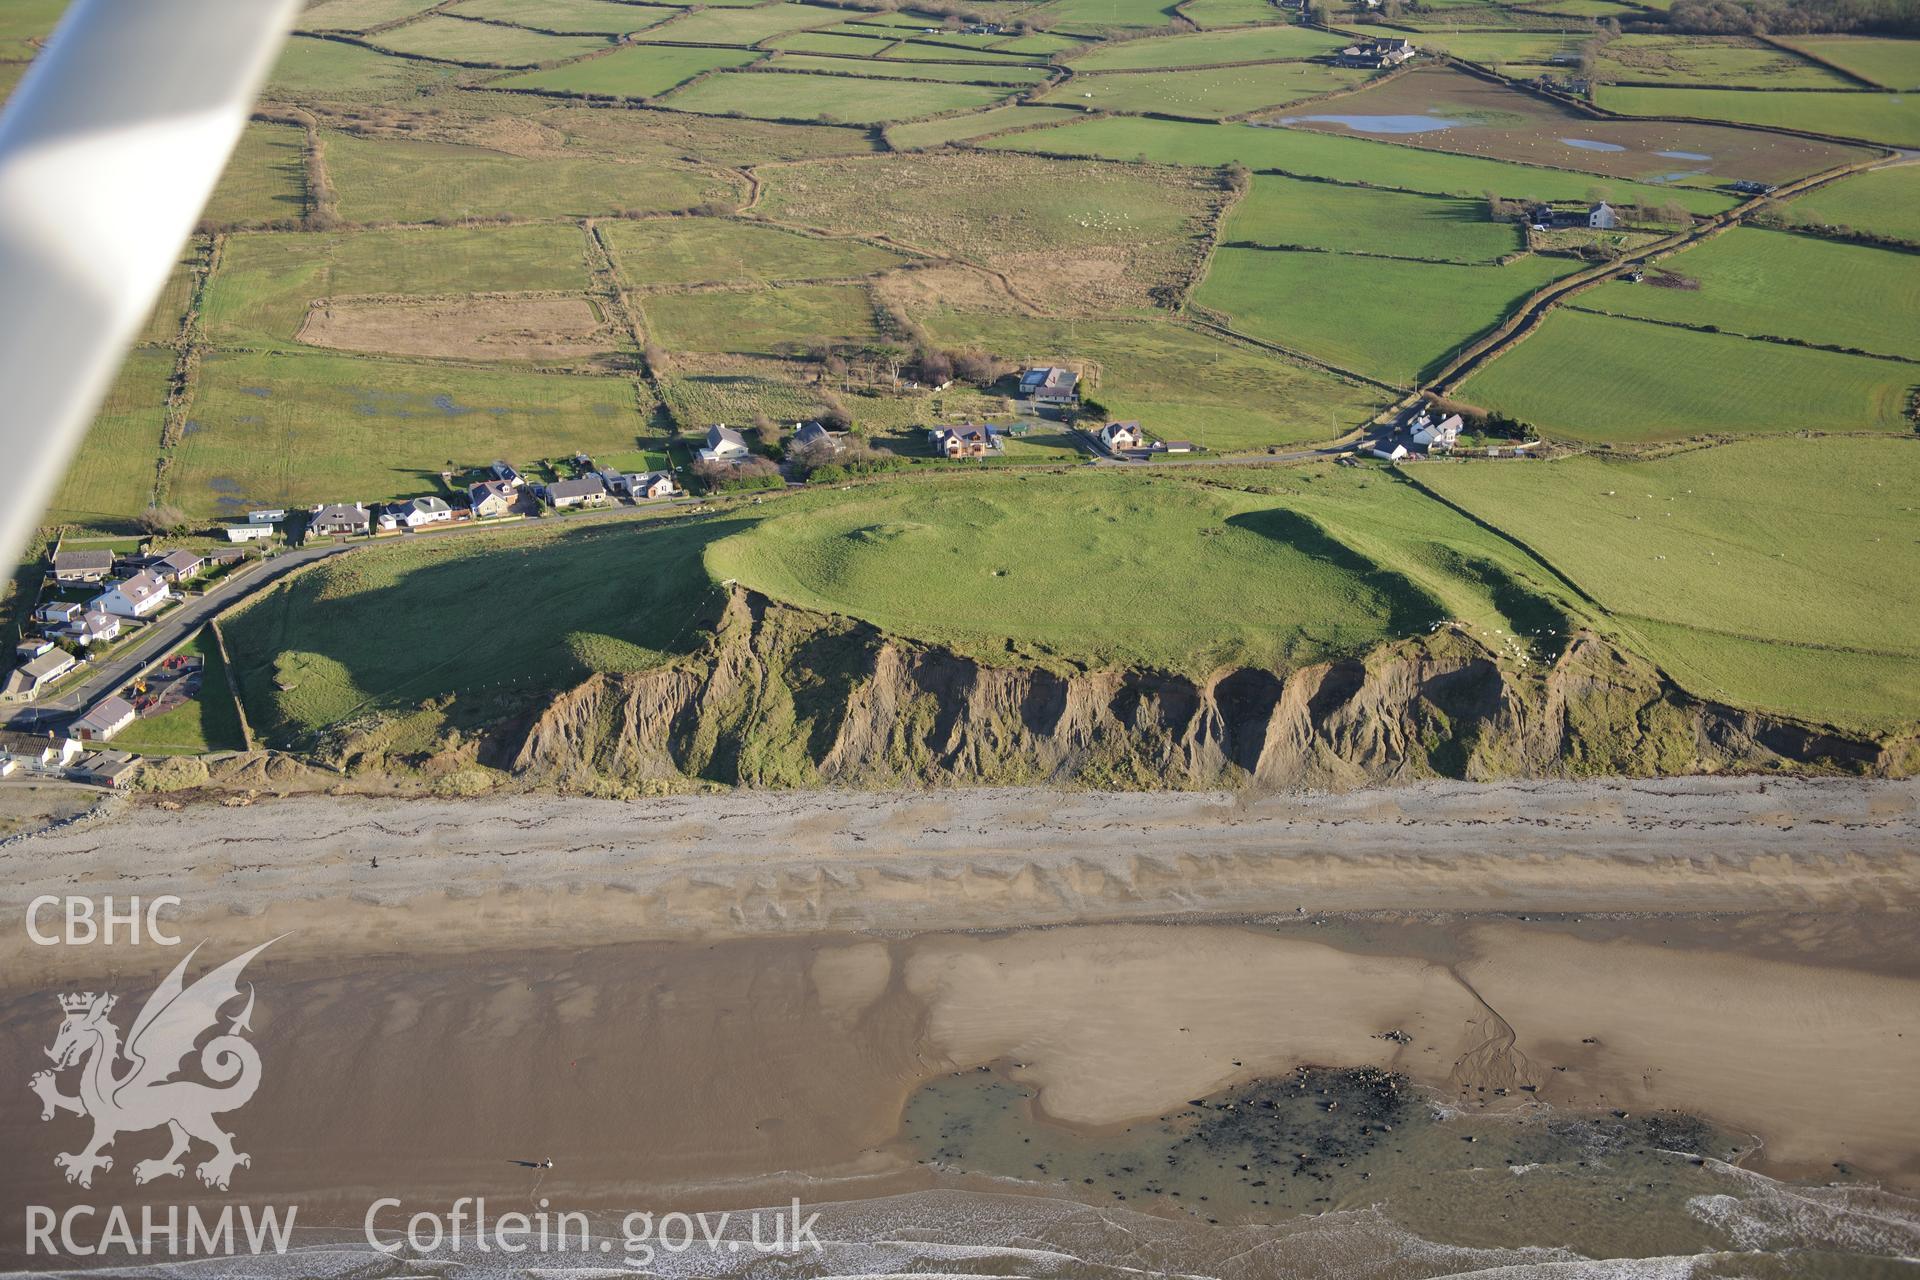 RCAHMW colour oblique photograph of Dinas Dinlle Hillfort, Llandwrog, with eroding cliff face. Taken by Toby Driver on 10/12/2012.